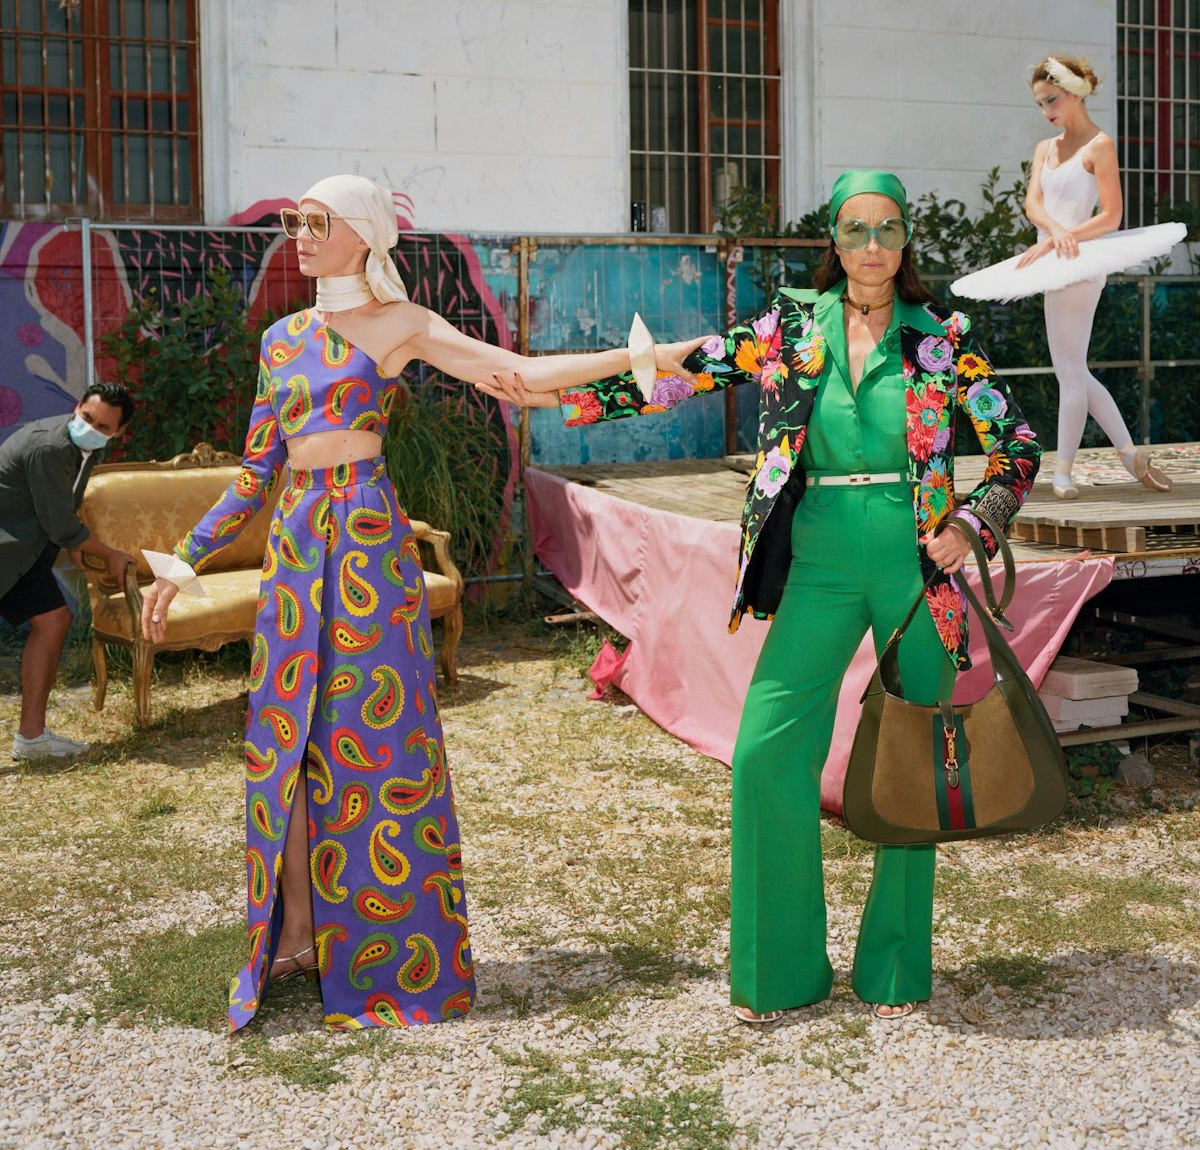 Gucci presents the Epilogue campaign, the final chapter of an epic trilogy